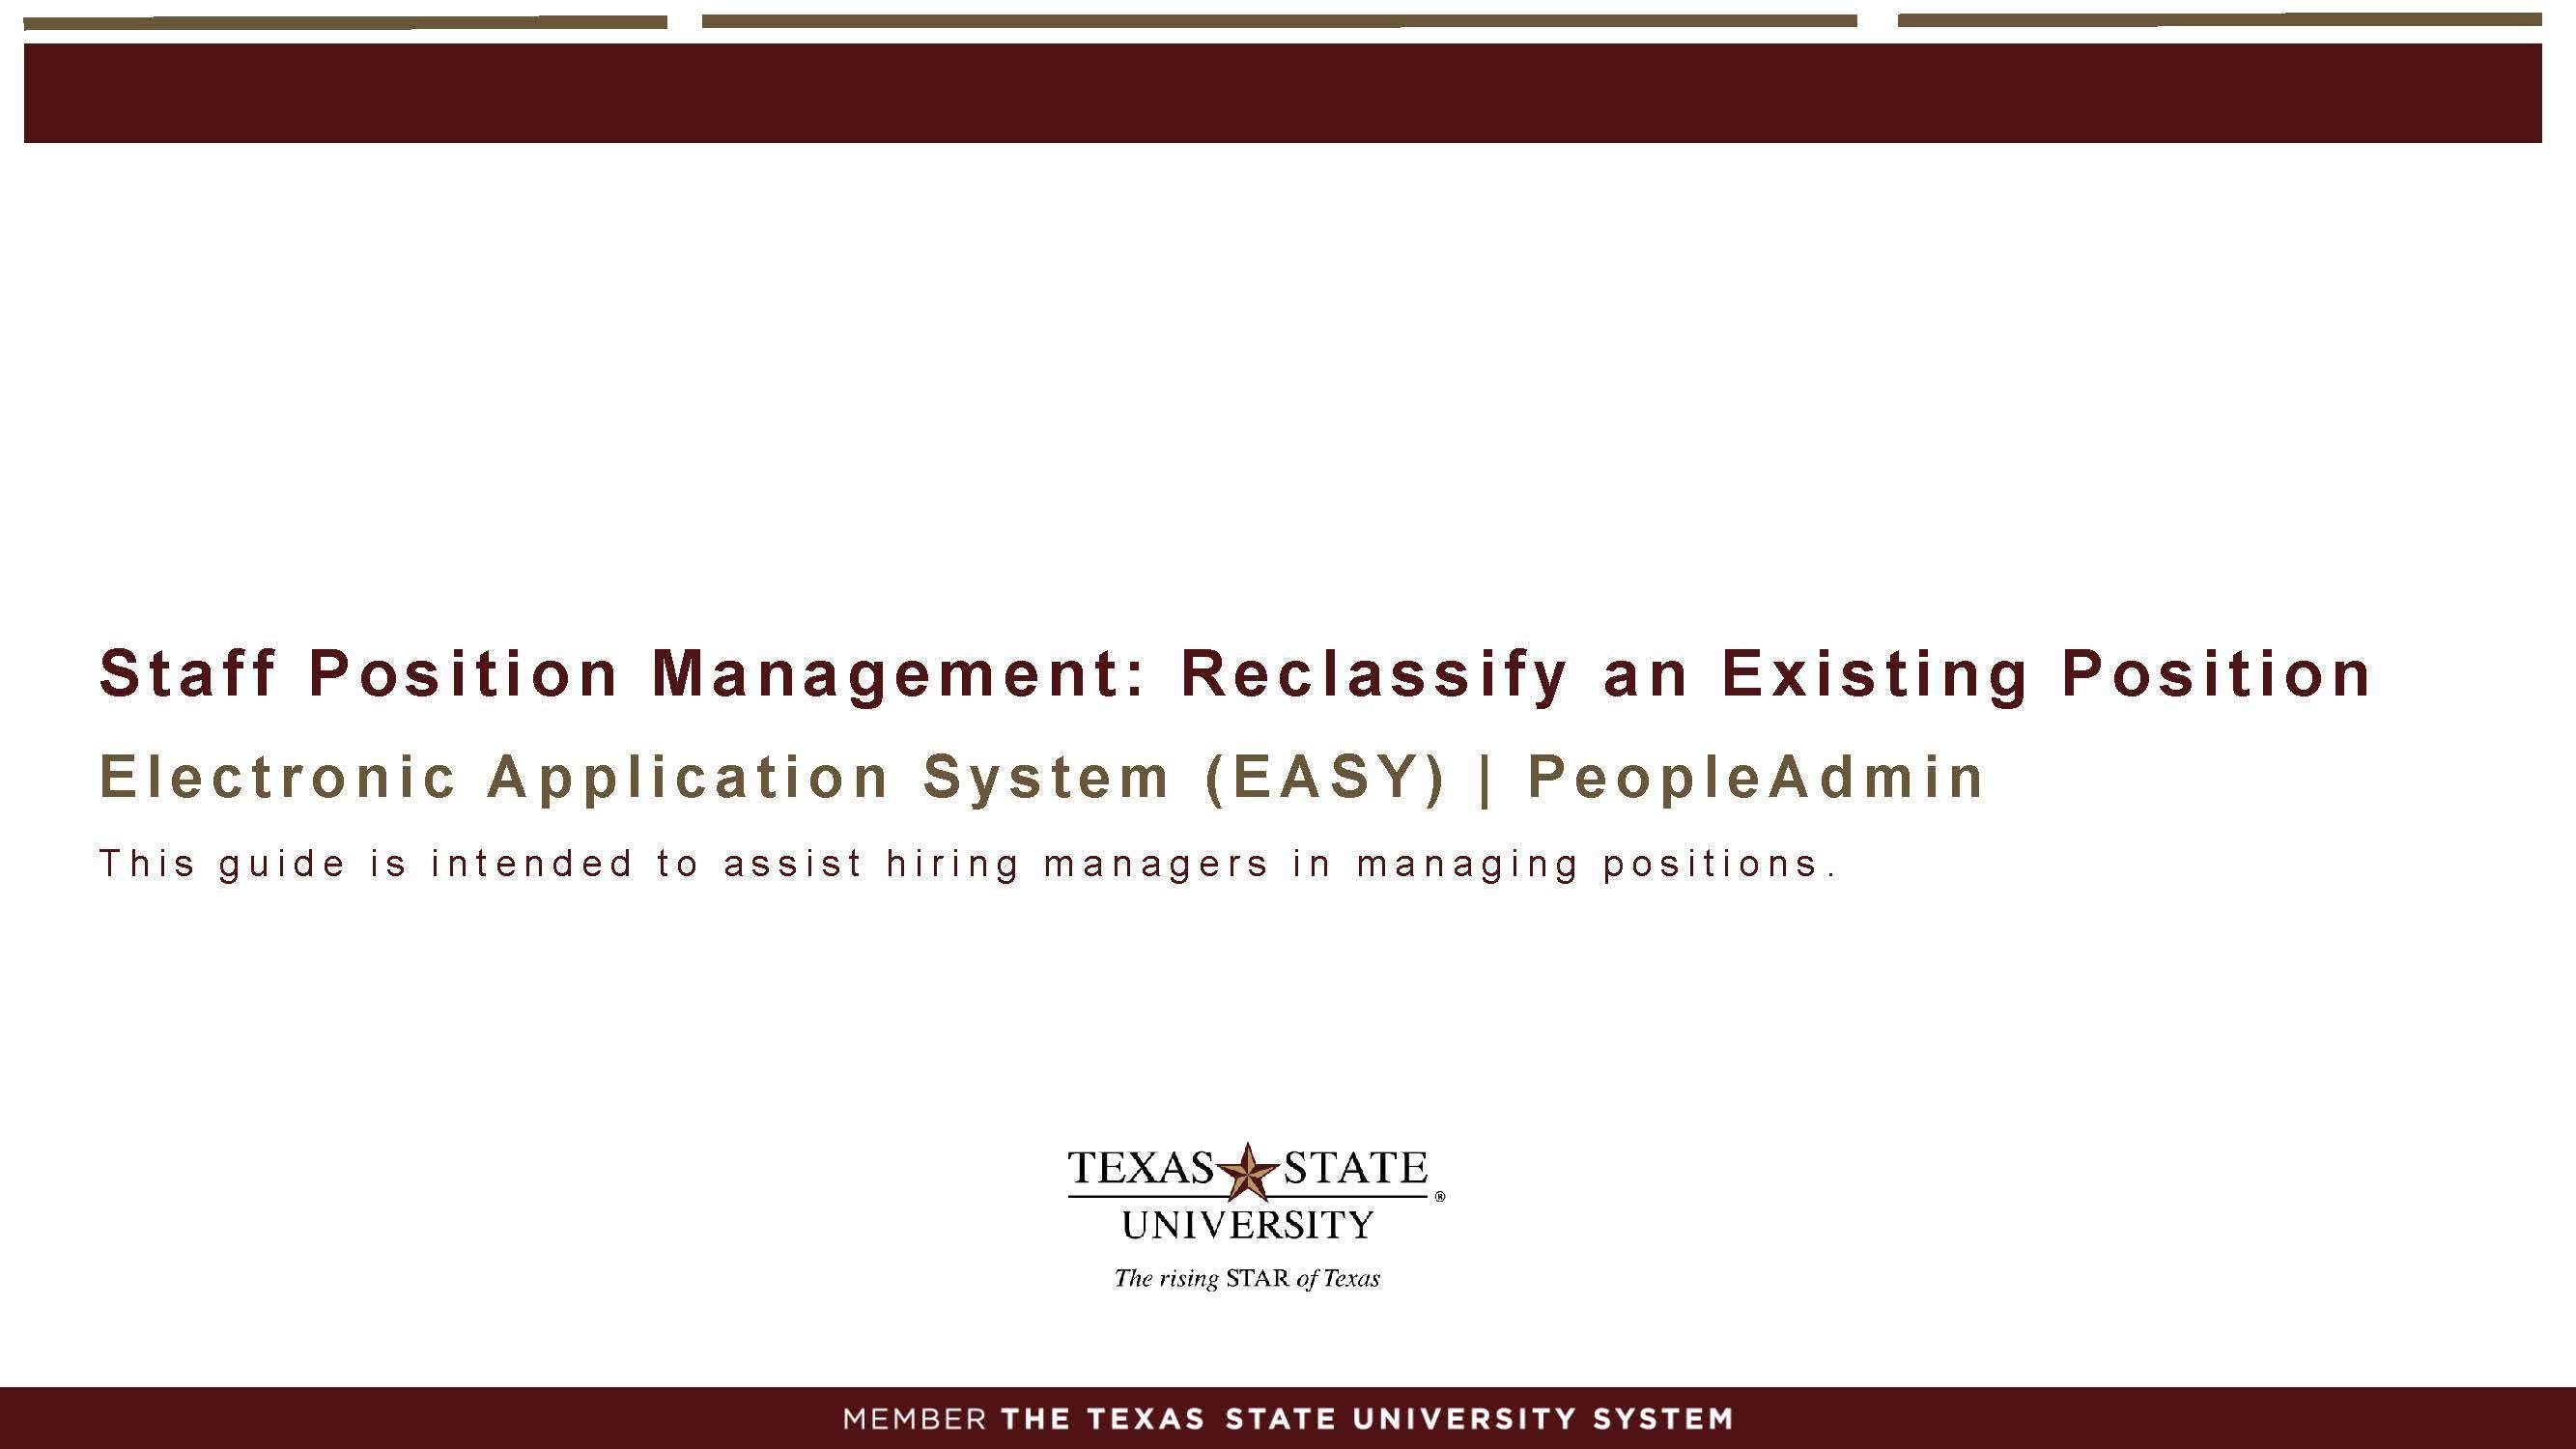 staff position management: reclassify an existing position power point